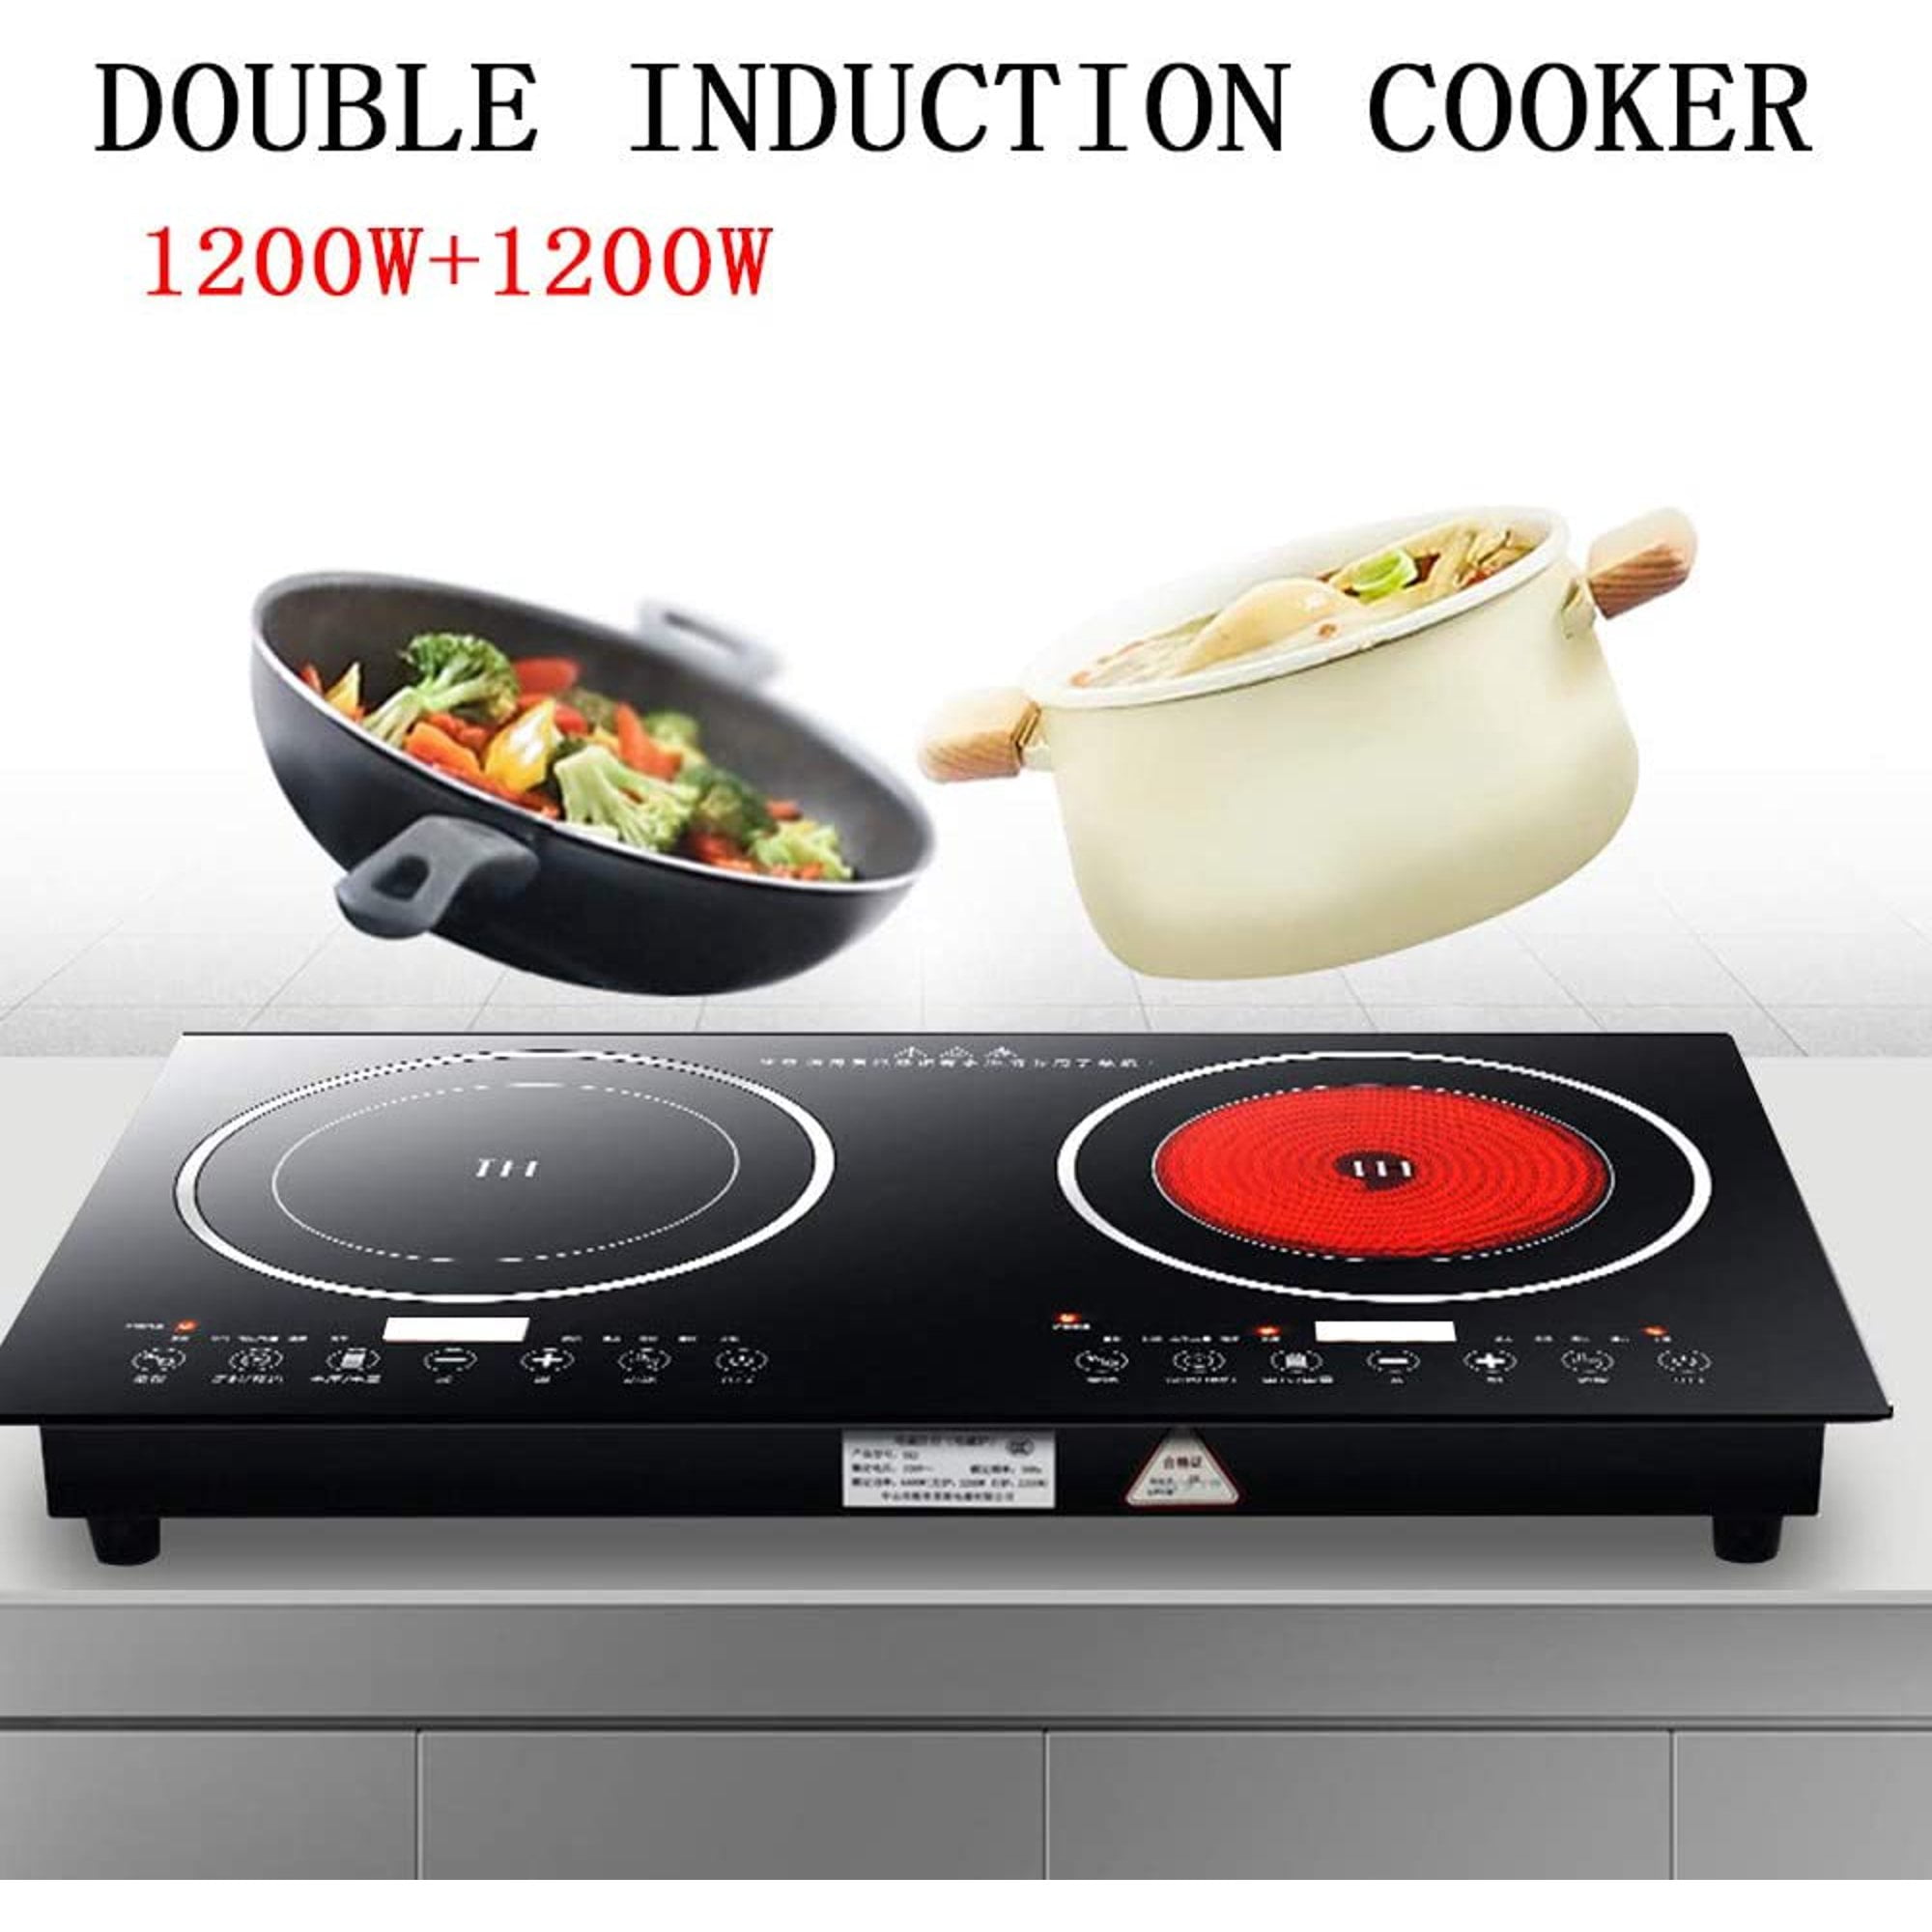 Moidnei Portable Induction Cooktop Induction Burner Countertop